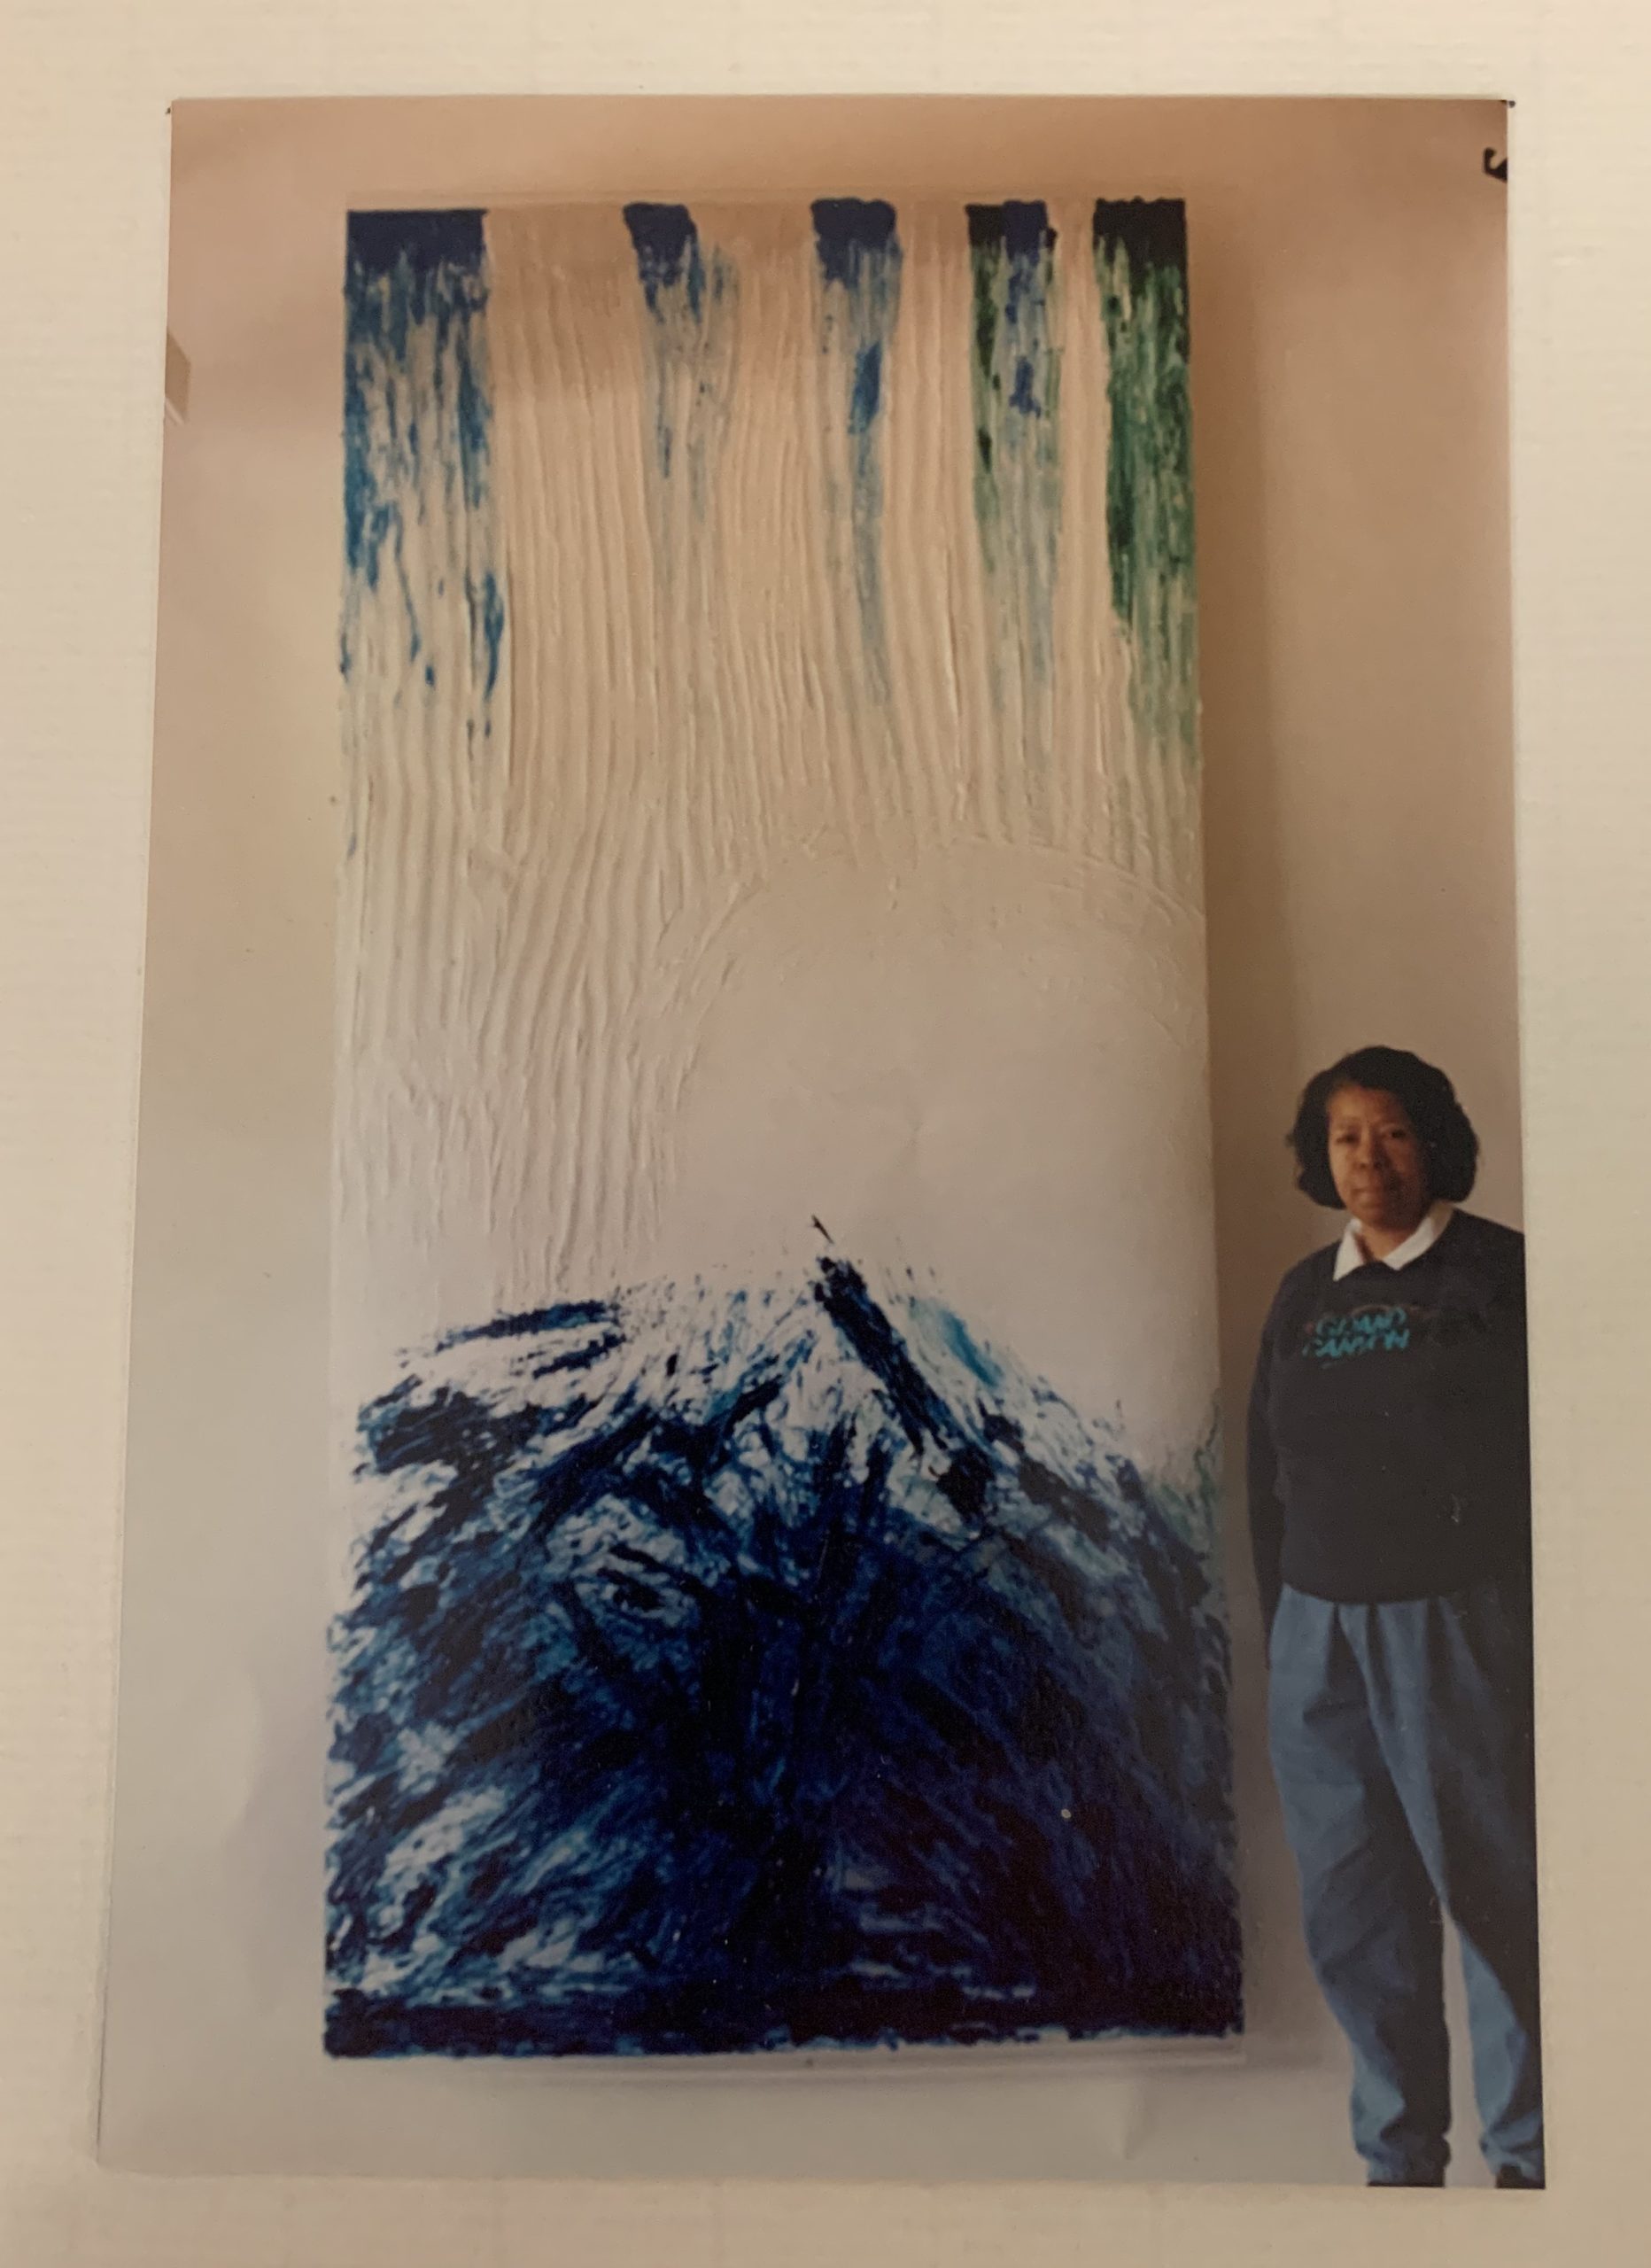 A Black woman stands by an art piece featuring the image of a mountain.